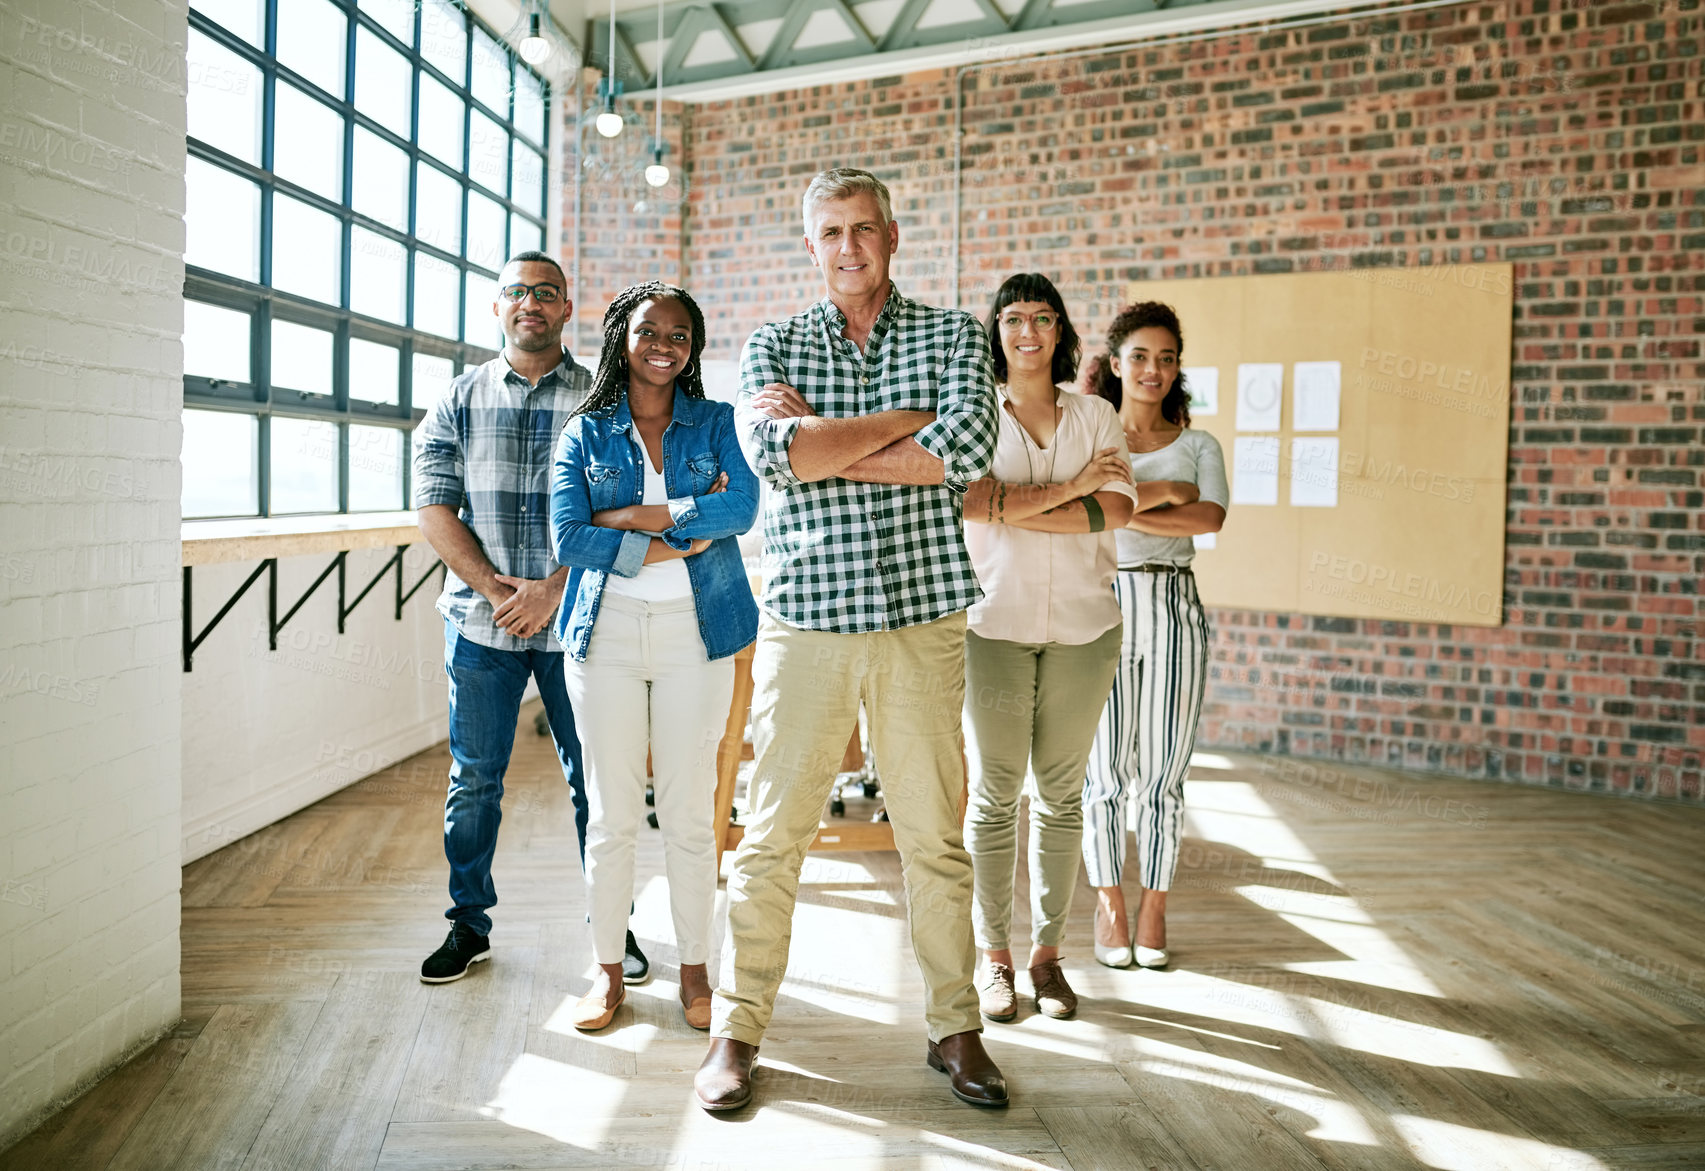 Buy stock photo Shot of a group of creative businesspeople standing together in an office